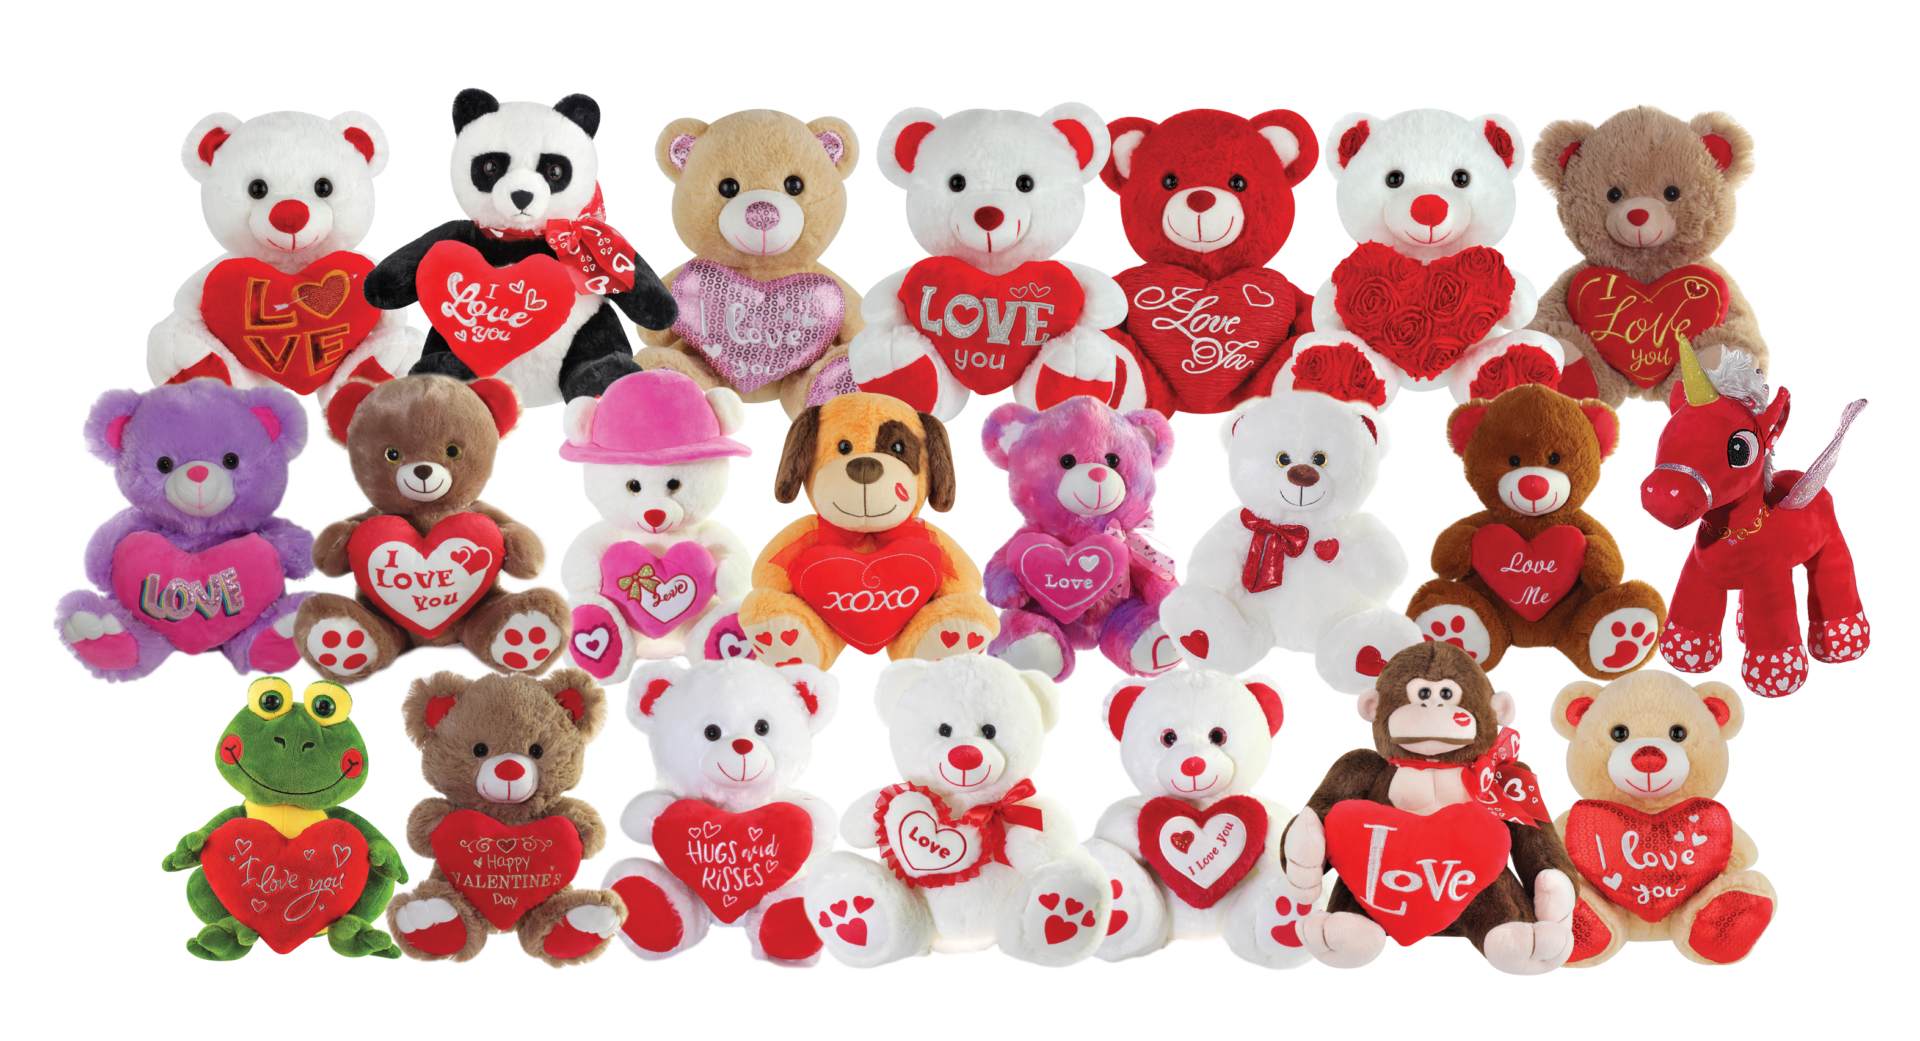 A bunch of stuffed animals that are all wearing hearts